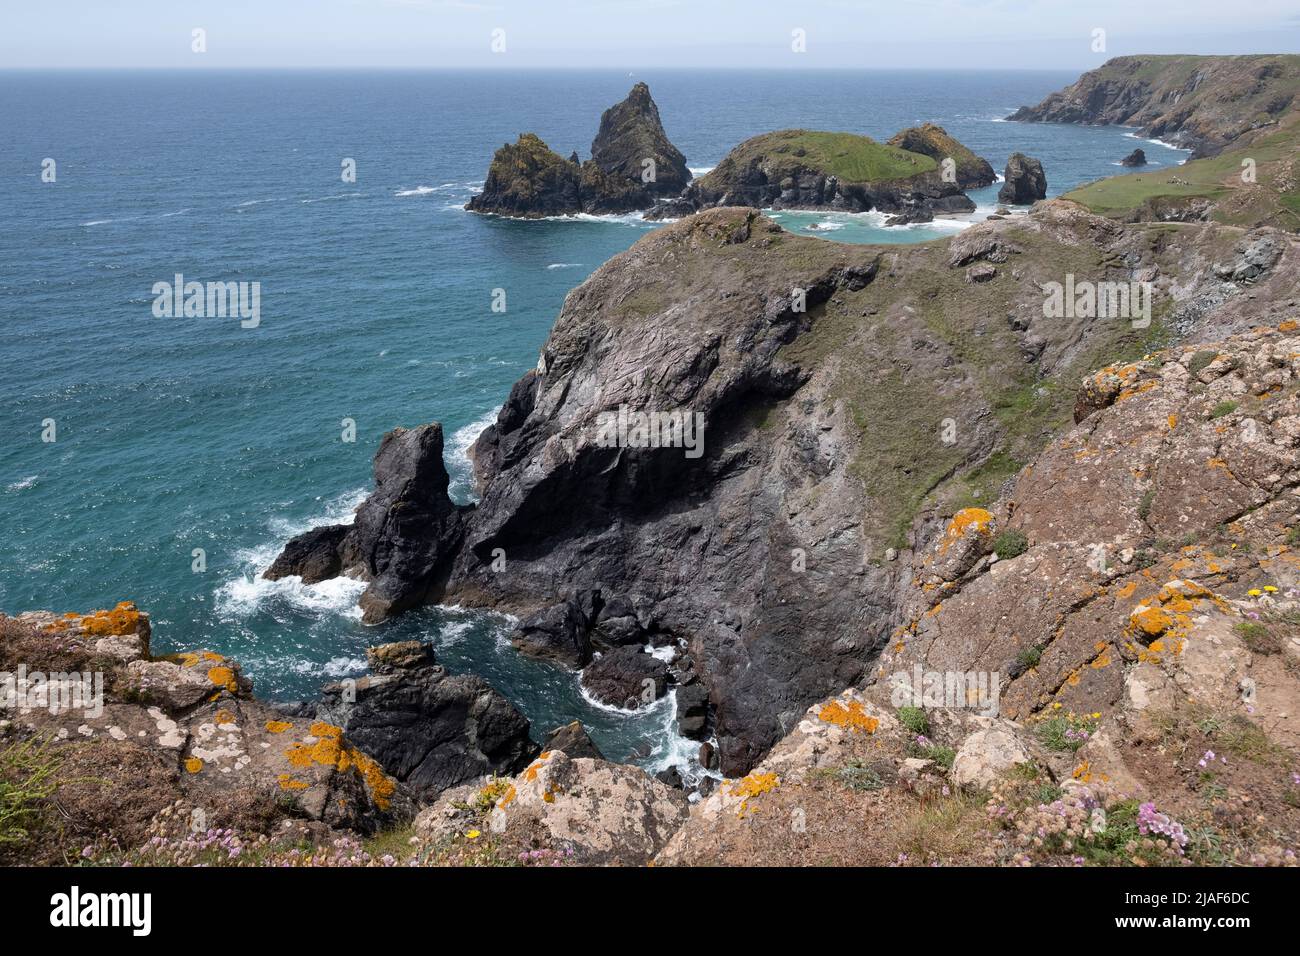 Spectacular scenery at Kynance Cove, Cornwall, England. Stock Photo